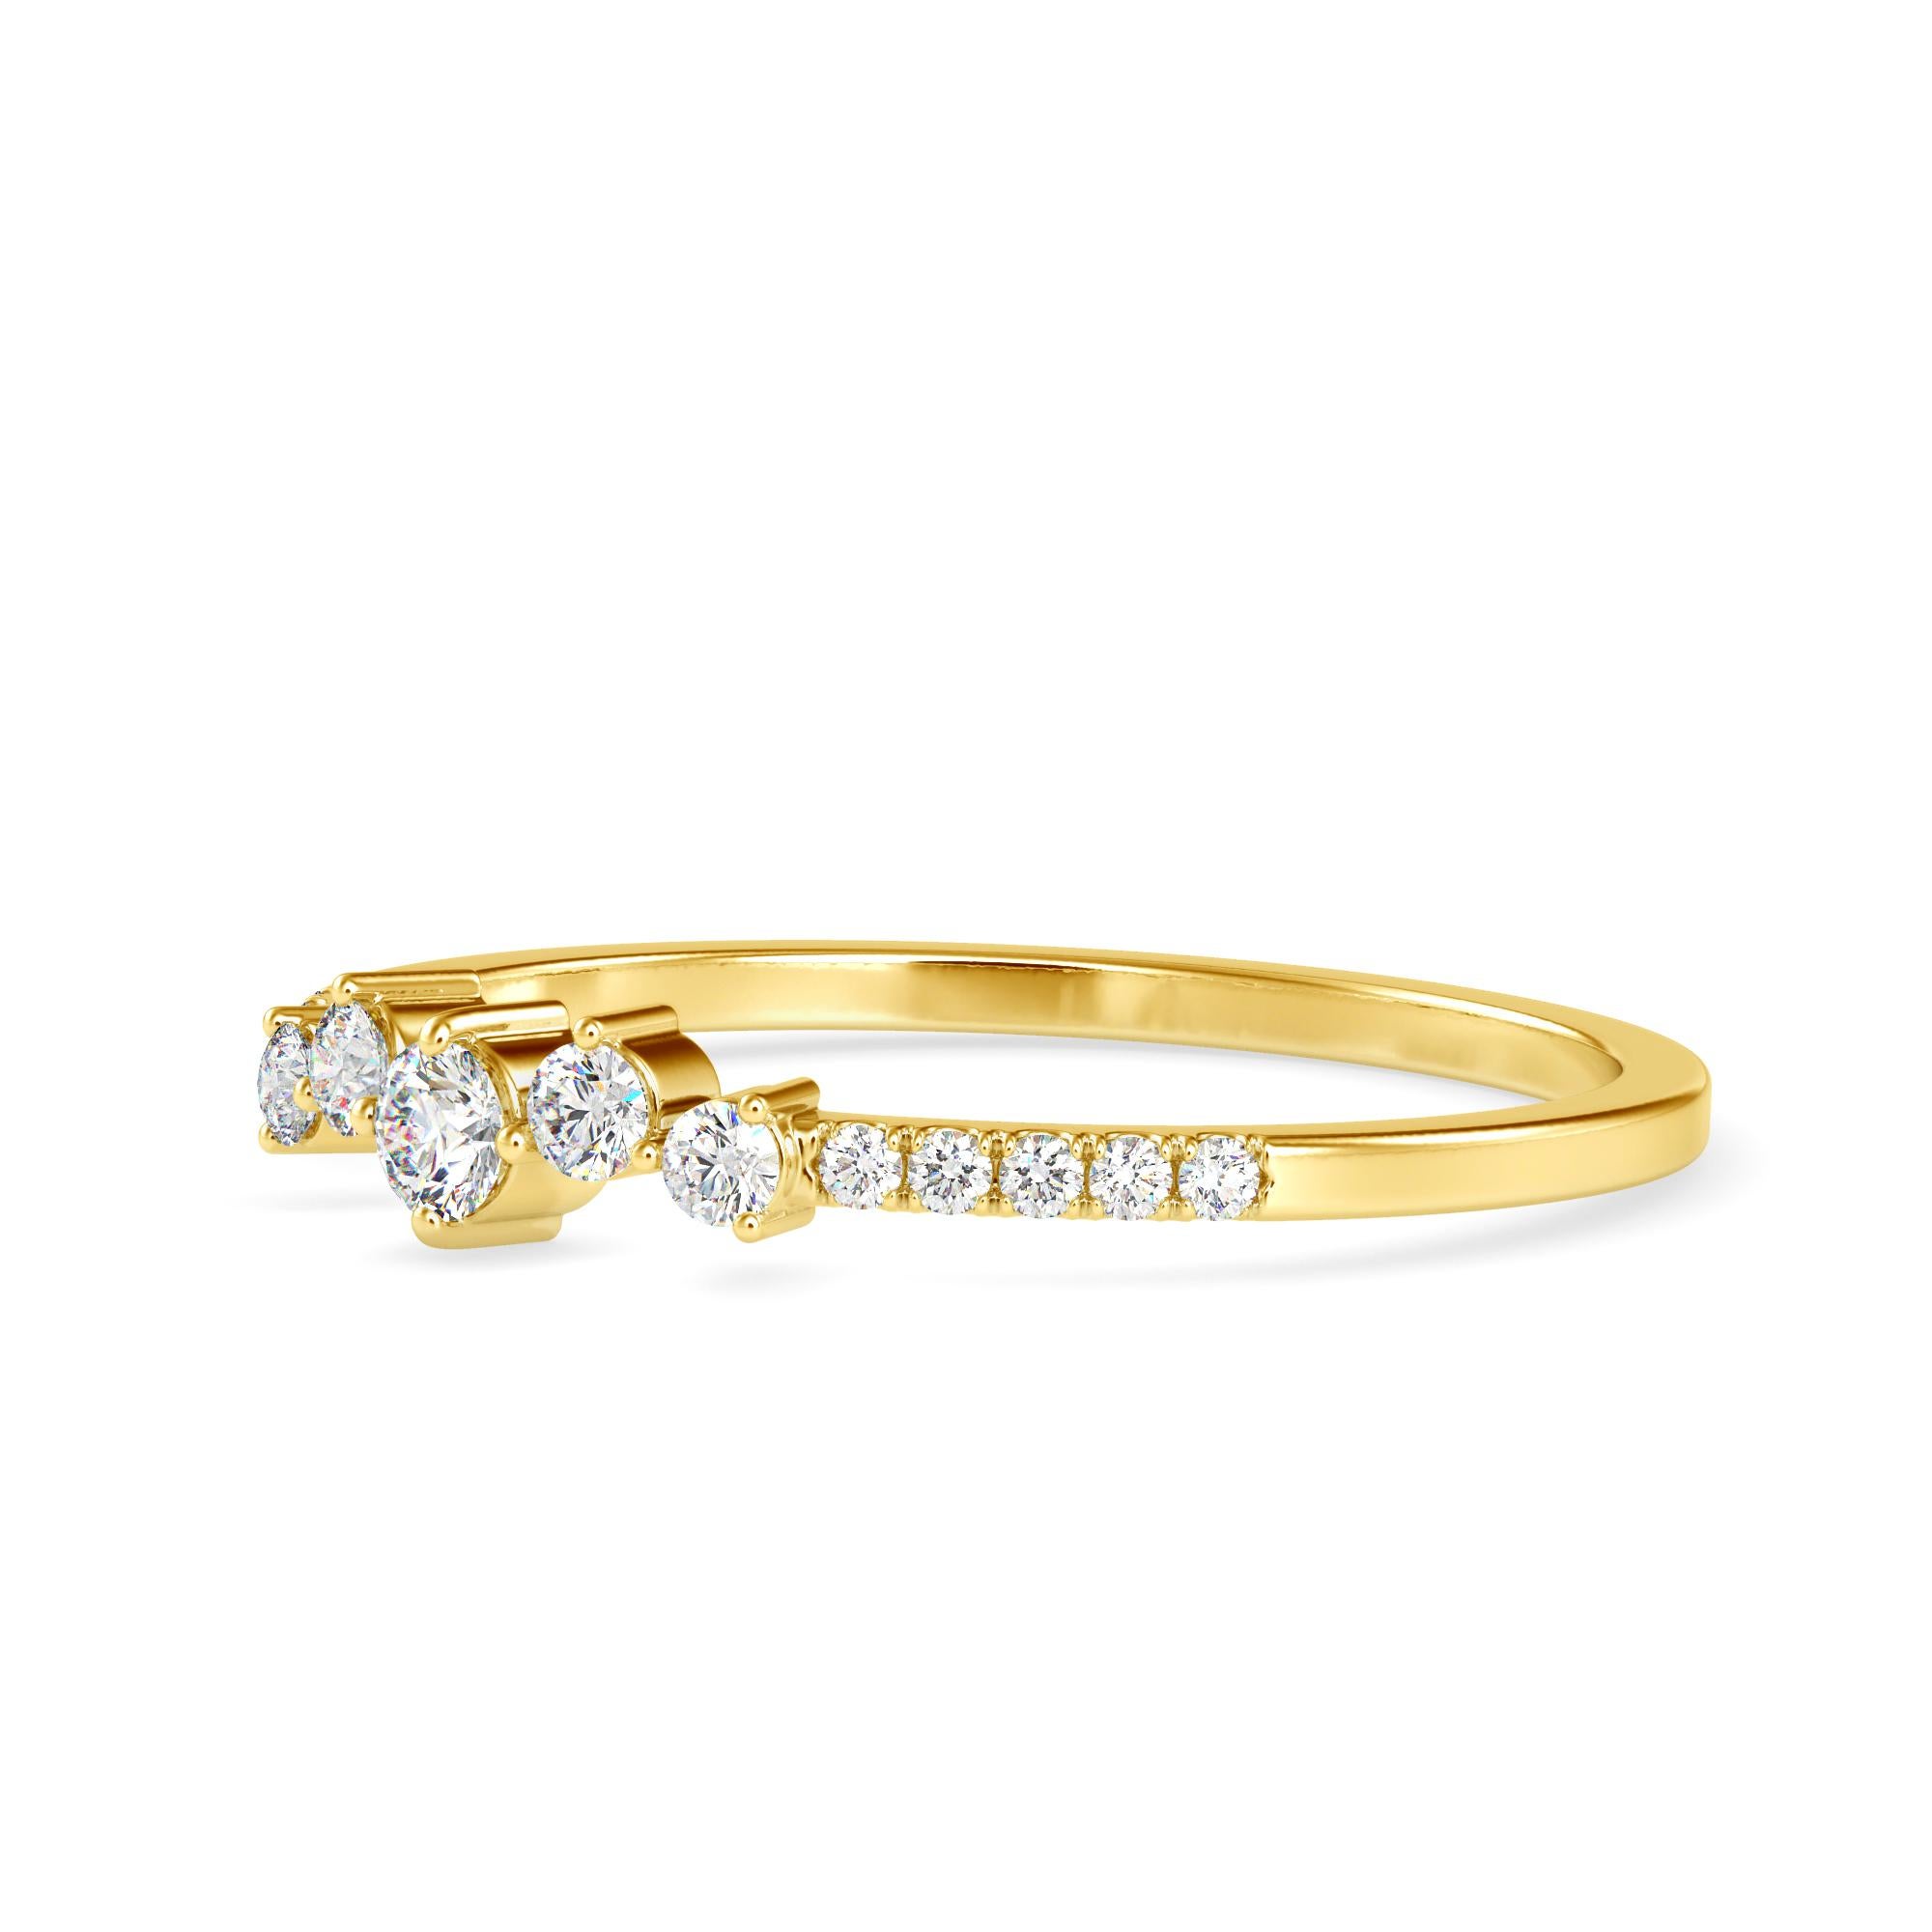 0.16 Carat Diamond 14K Yellow Gold Ring
Stamped: 14K 
Total Ring Weight: 1.2 Grams 
Center Diamond Weight: 0.05 Carat (F-G Color, VS2-SI1 Clarity)  2.4 Millimeters
Side Diamonds Weight: 0.03 Carat (F-G Color, VS2-SI1 Clarity), 1.6 Millimeters
Side